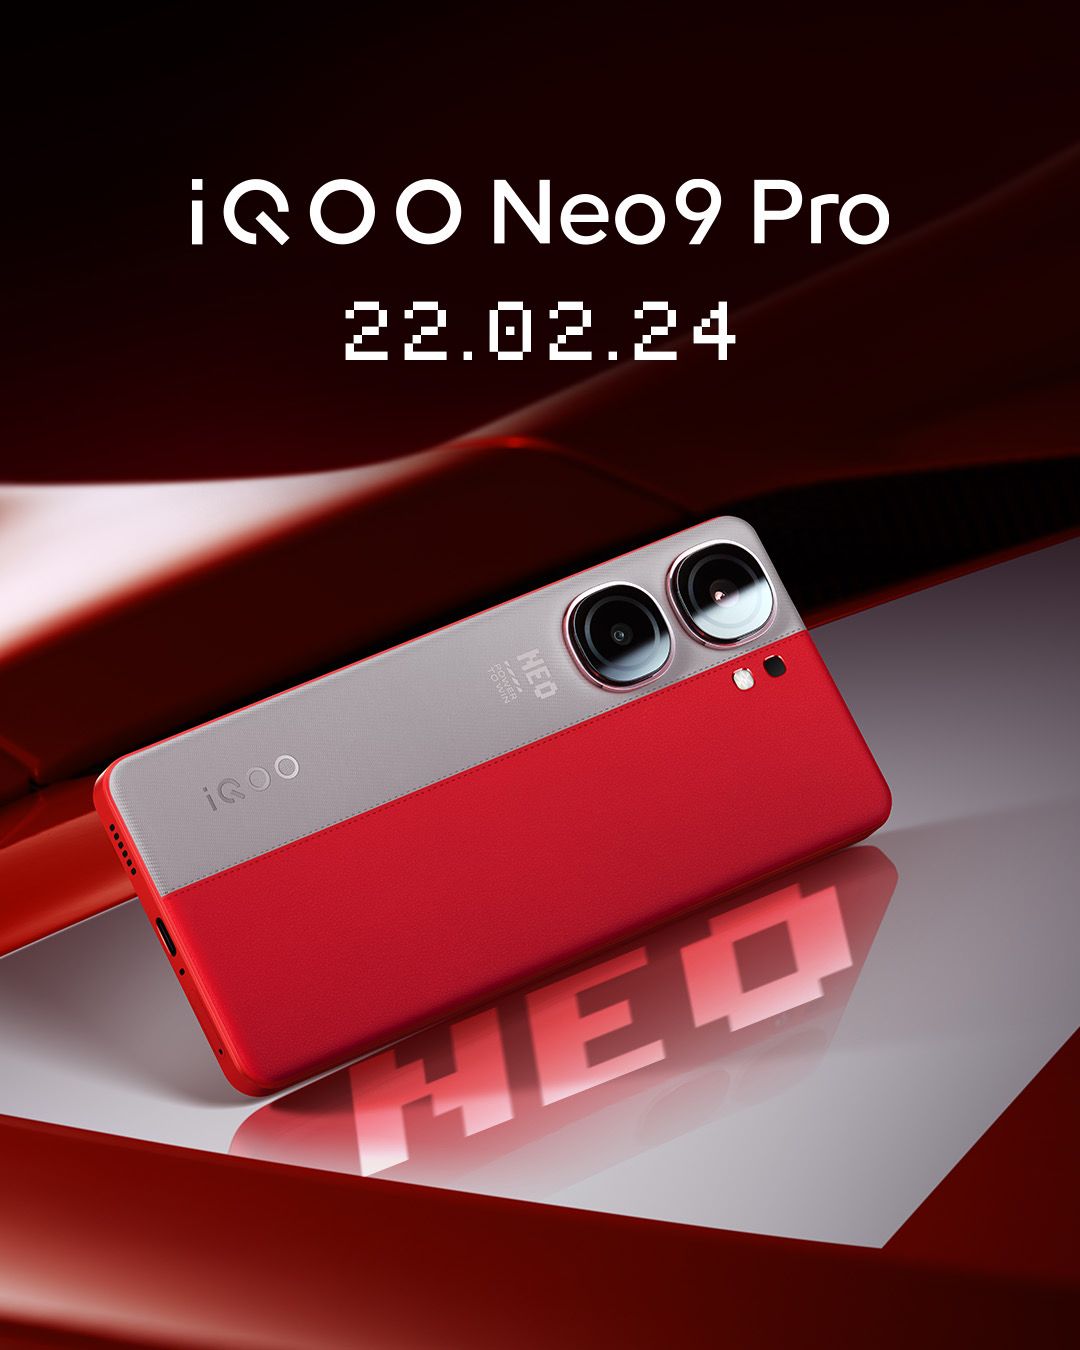 iQOO Neo 9 Pro Set to Launch in India on February 22